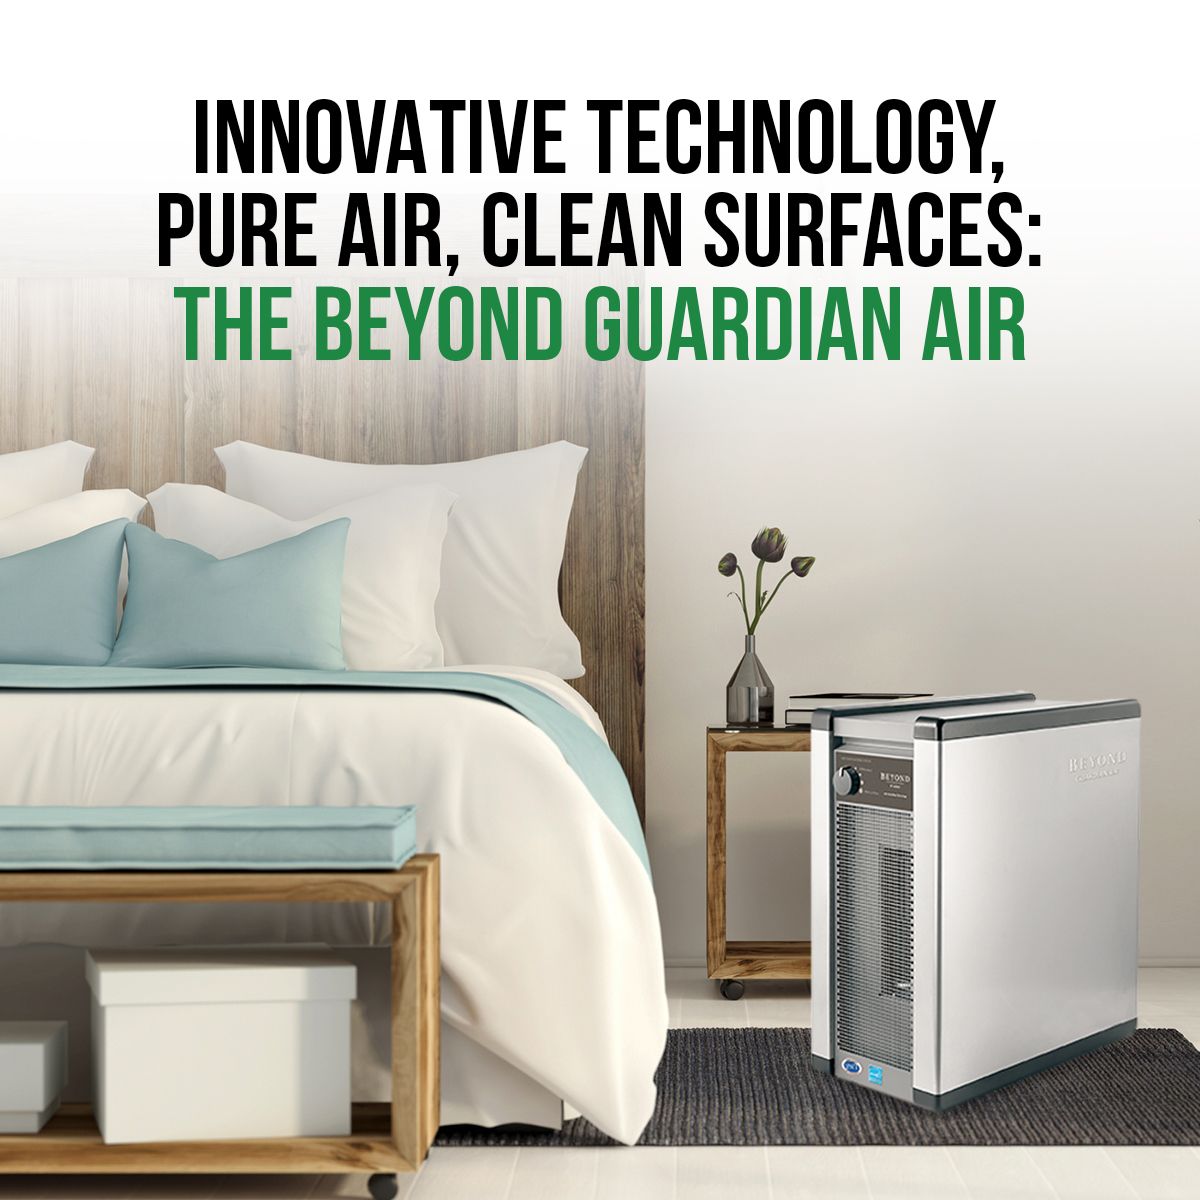 Innovative Technology, Pure Air, Clean Surfaces: The Beyond Guardian Air